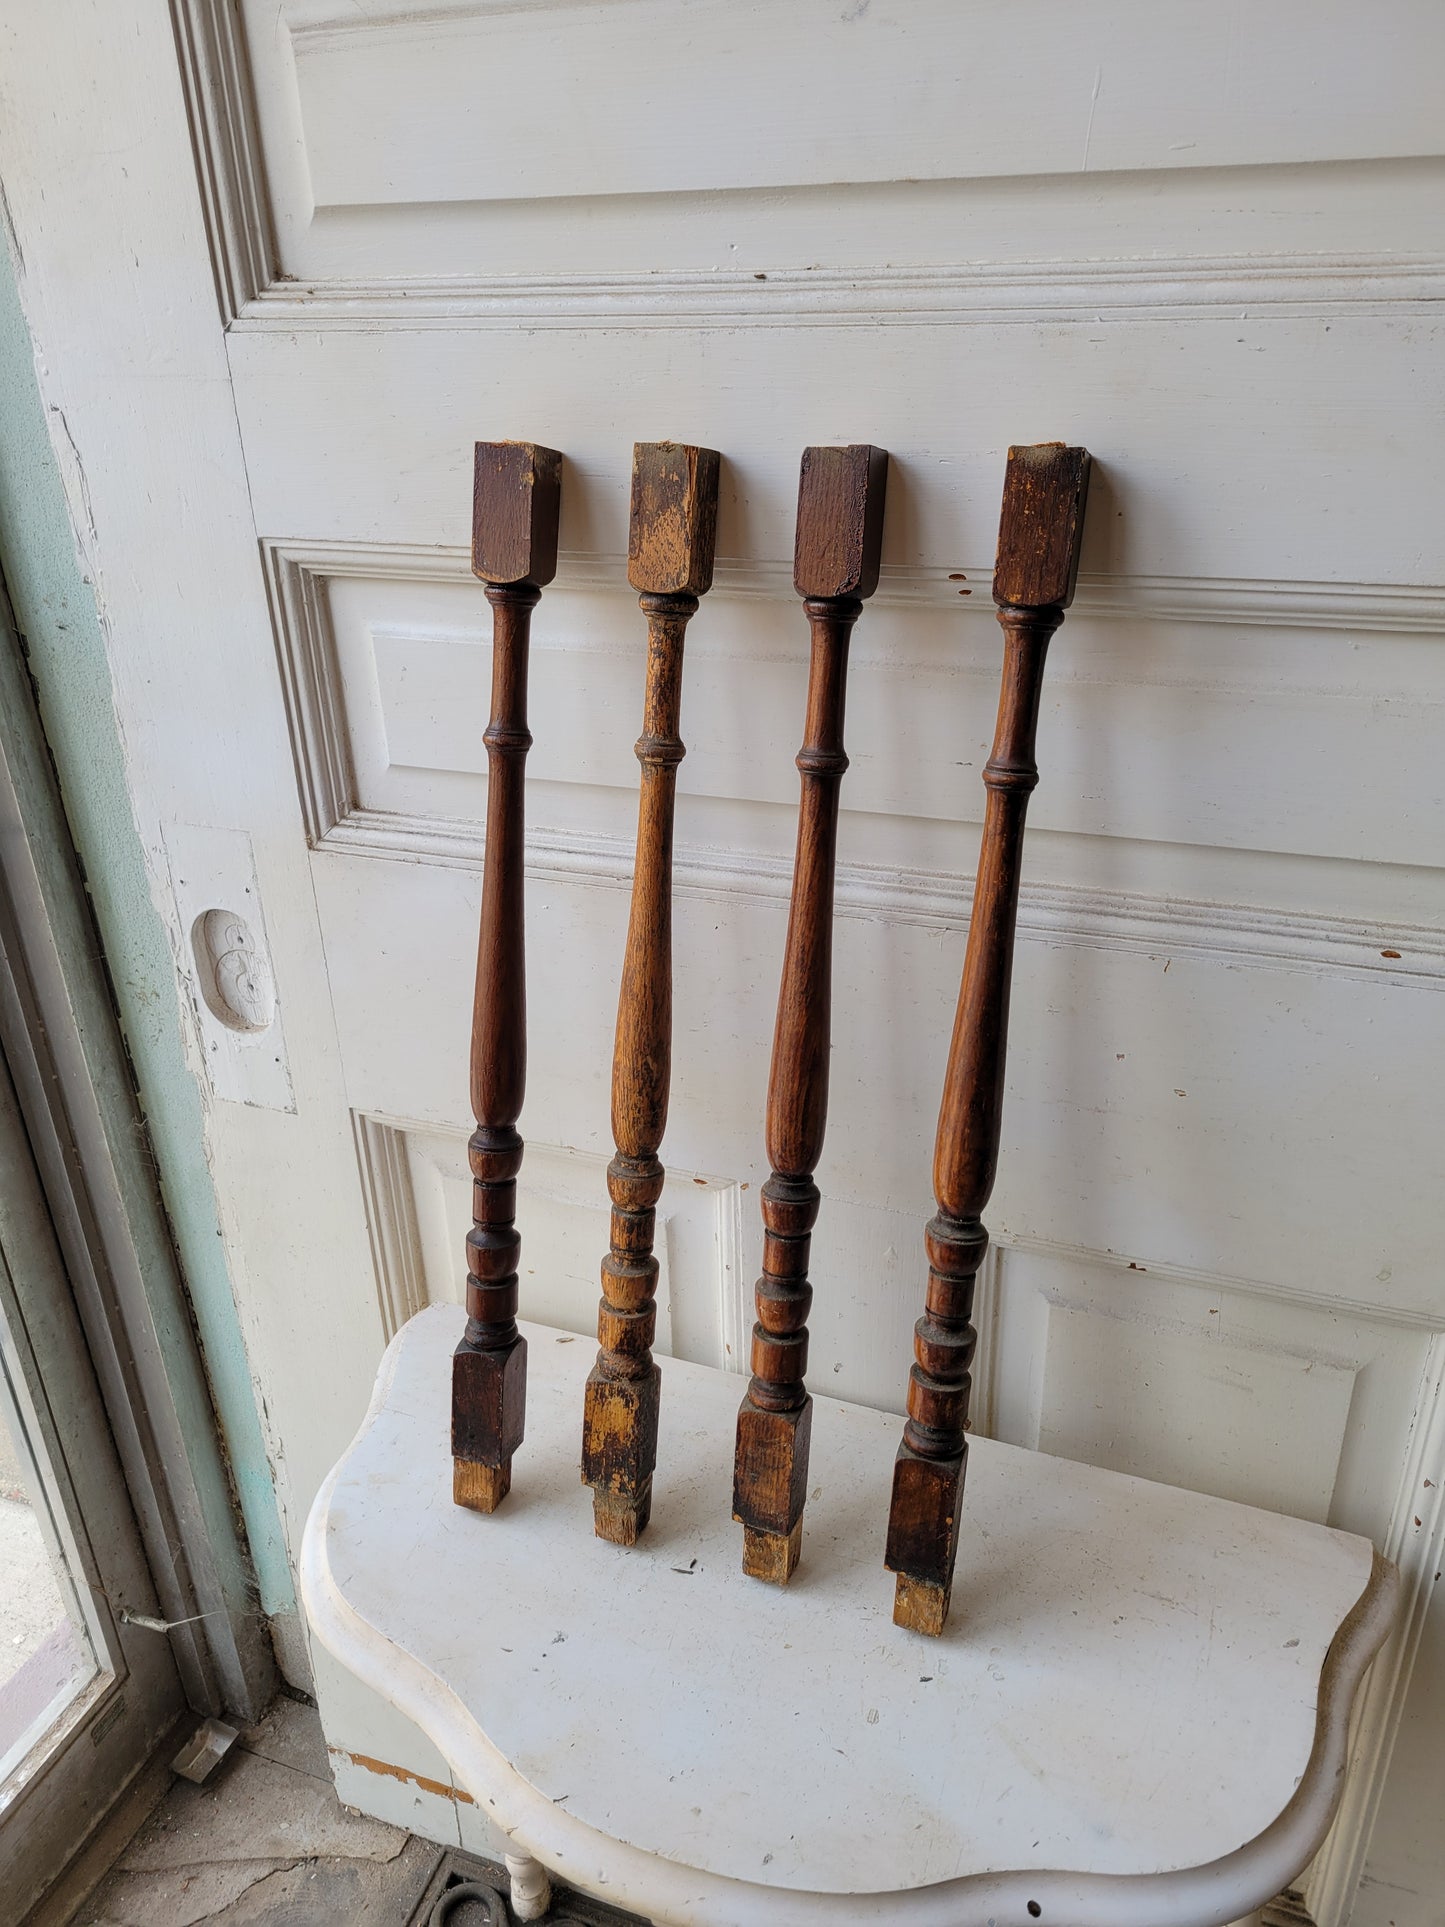 Eleven Antique Turned Wood Spindles, 11 Victorian Staircase Spindles